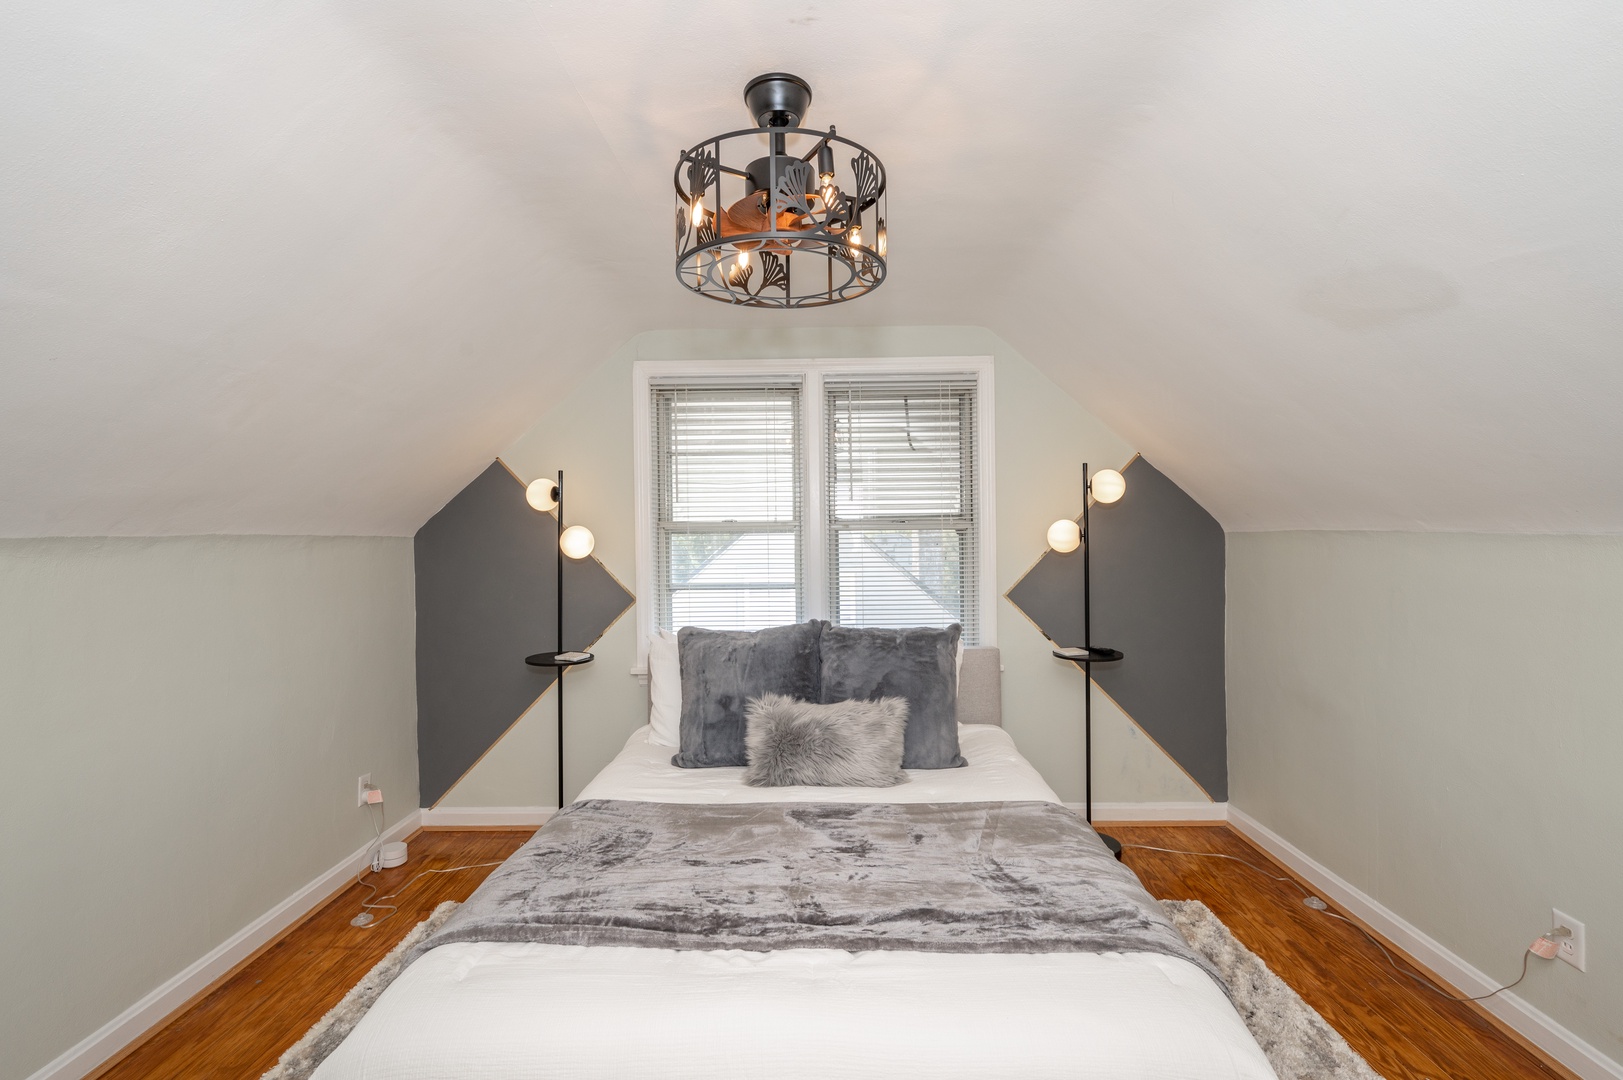 Fall into plush bedding in this stylish 2nd Floor Queen Bedroom with Ceiling Fan